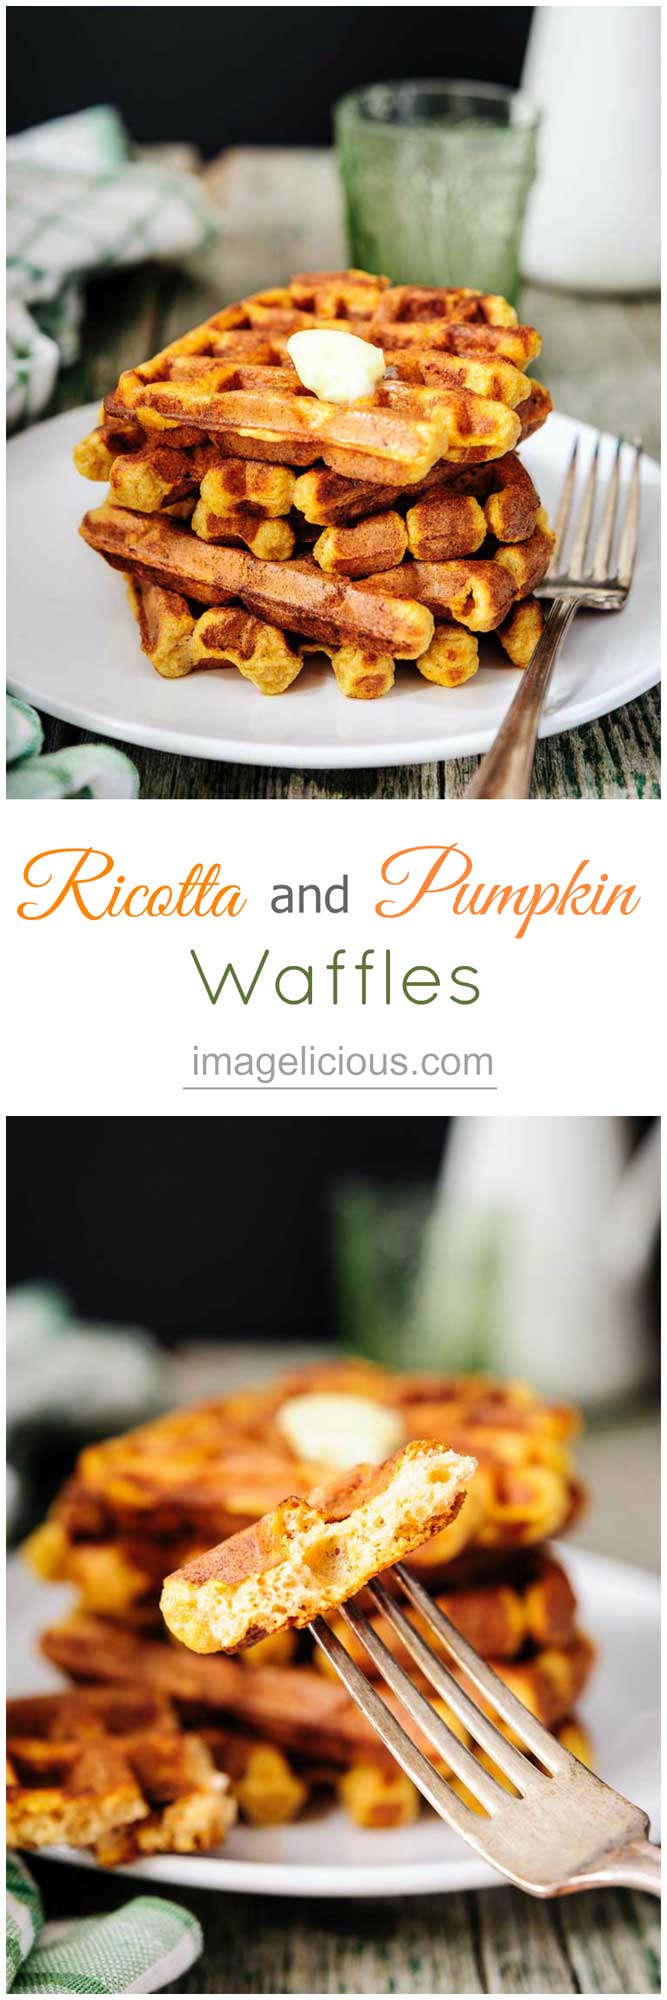 Ricotta and Pumpkin Waffles are perfect for brunch in the fall. Pumpkin melts into the batter and ricotta gives the pancakes a slightly tangy flavour. Crisp edges provide a jarring contrast to the soft and airy middle. Cinnamon, ginger, vanilla, and cloves make the waffles comforting and familiar | Imagelicious